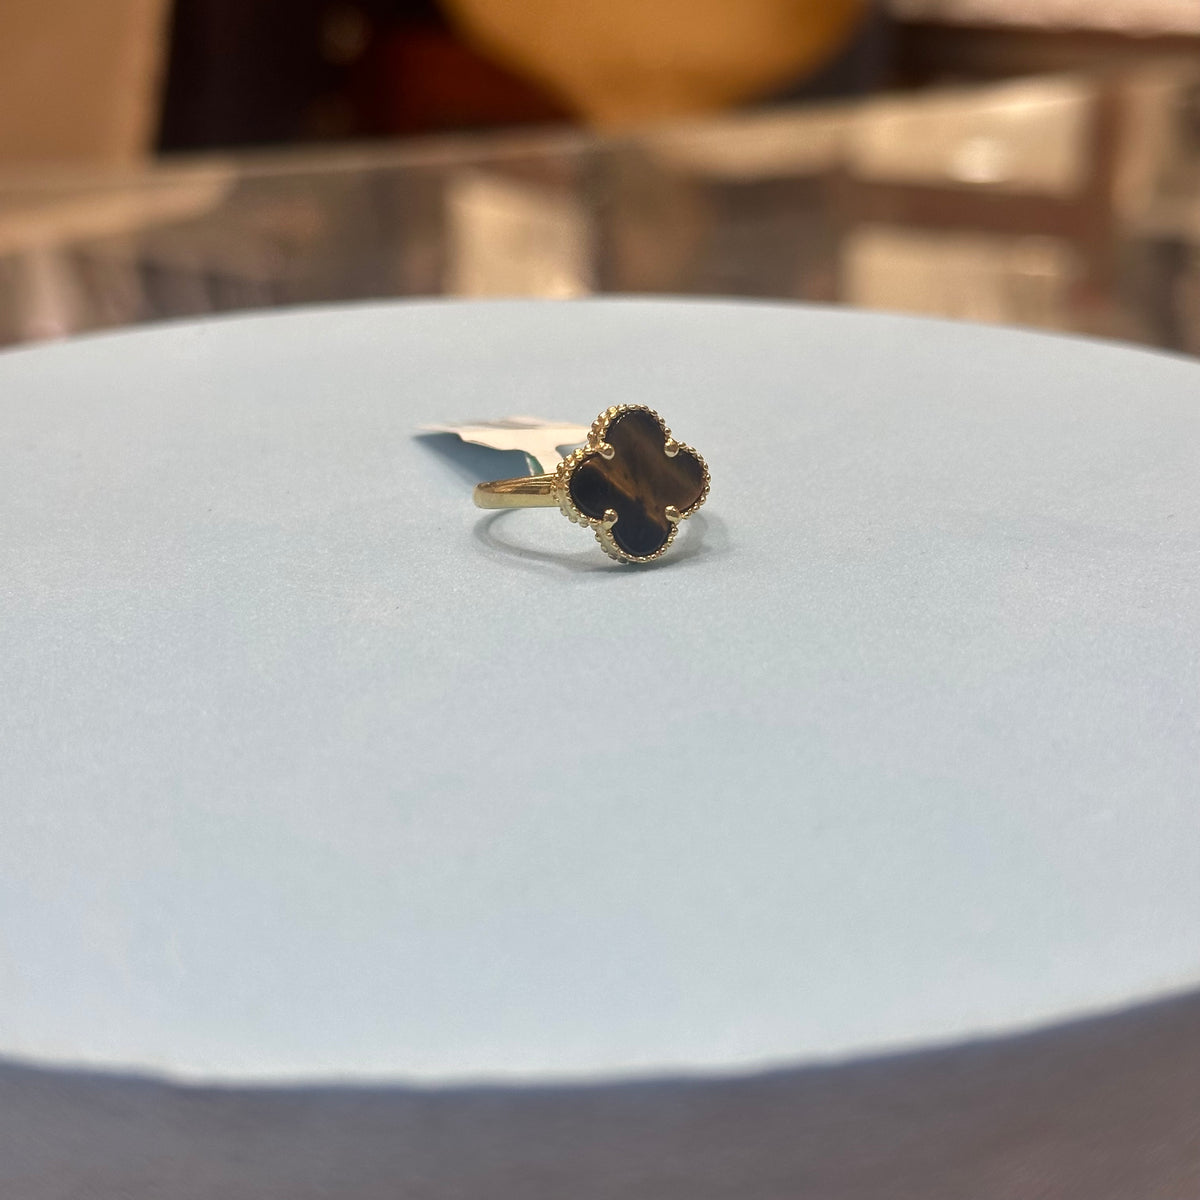 Clearance Sale - Brown Flower Ring